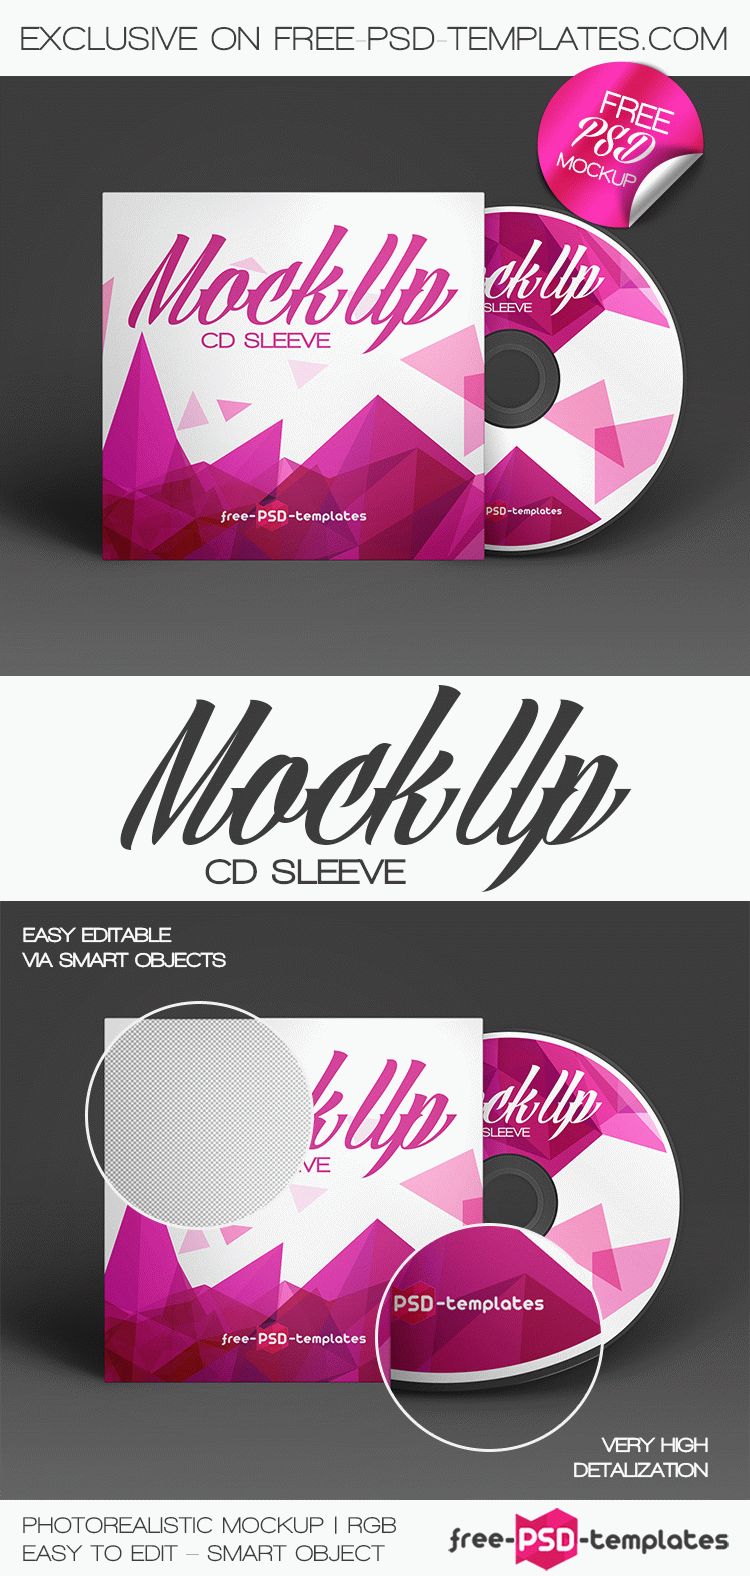 Download Free CD Sleeve Mock-up in PSD | Free PSD Templates